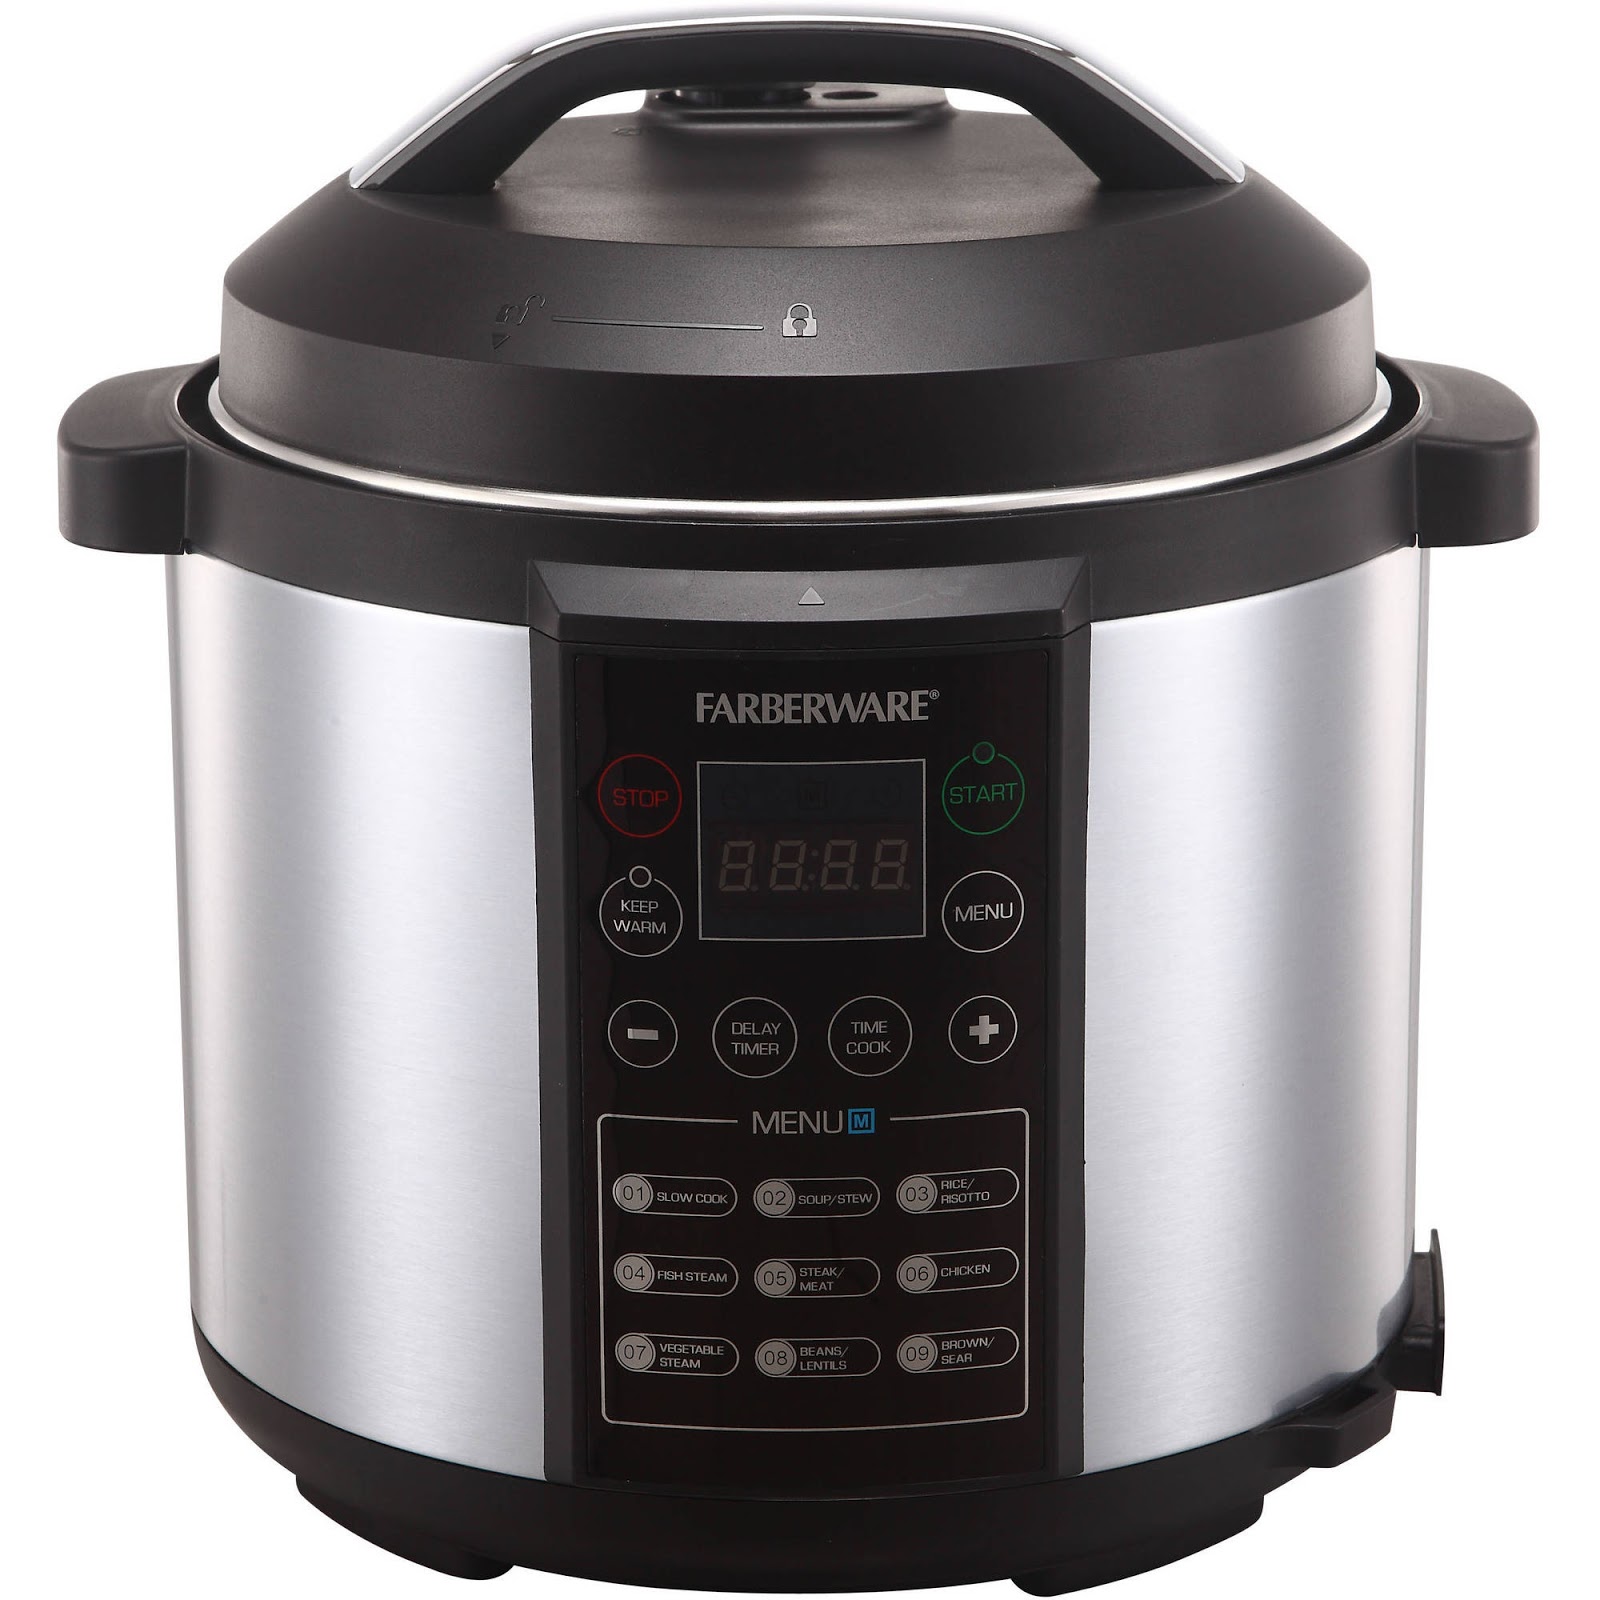 REFLECTIONS: Our First Pressure Cooker